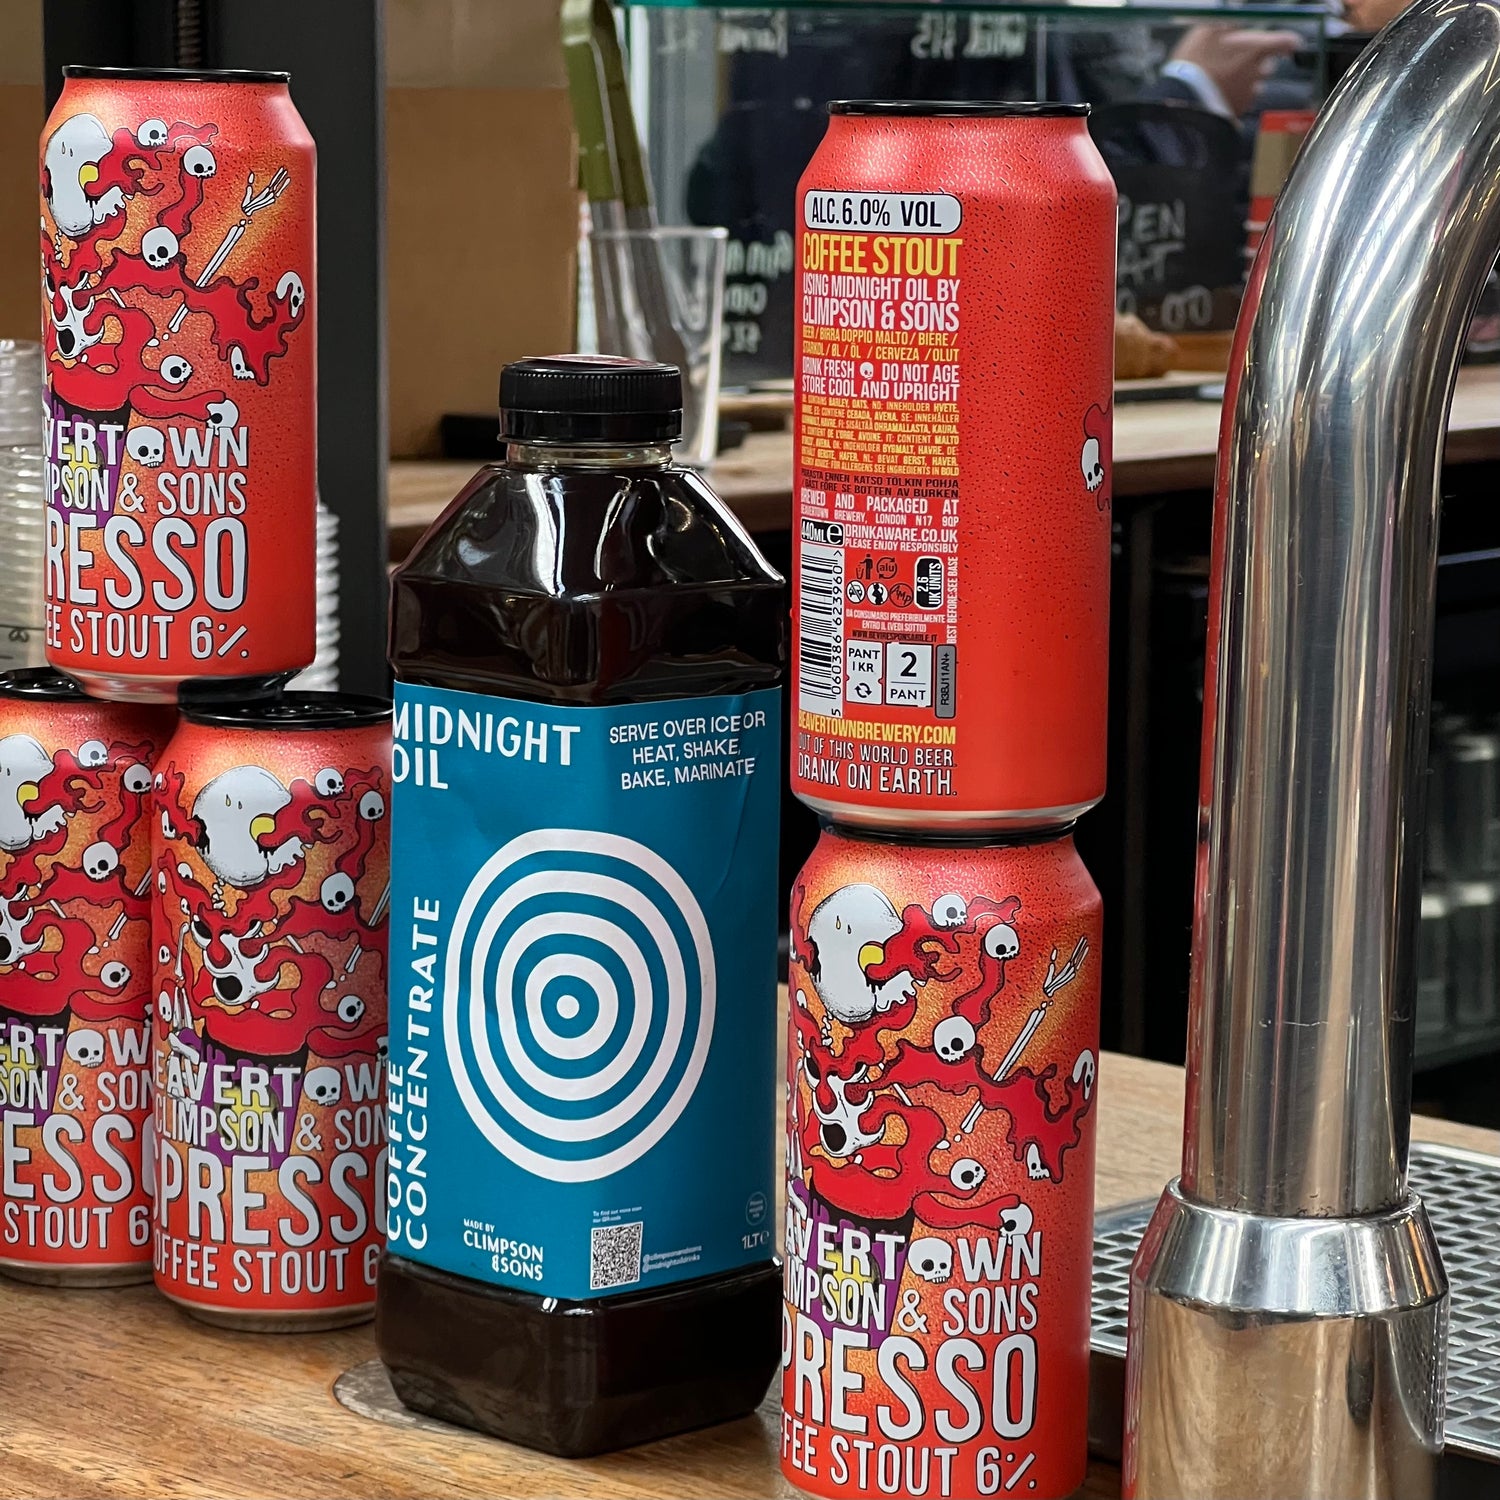 Introducing Spresso by Beavertown x Climpson & Sons & Midnight Oil Drinks